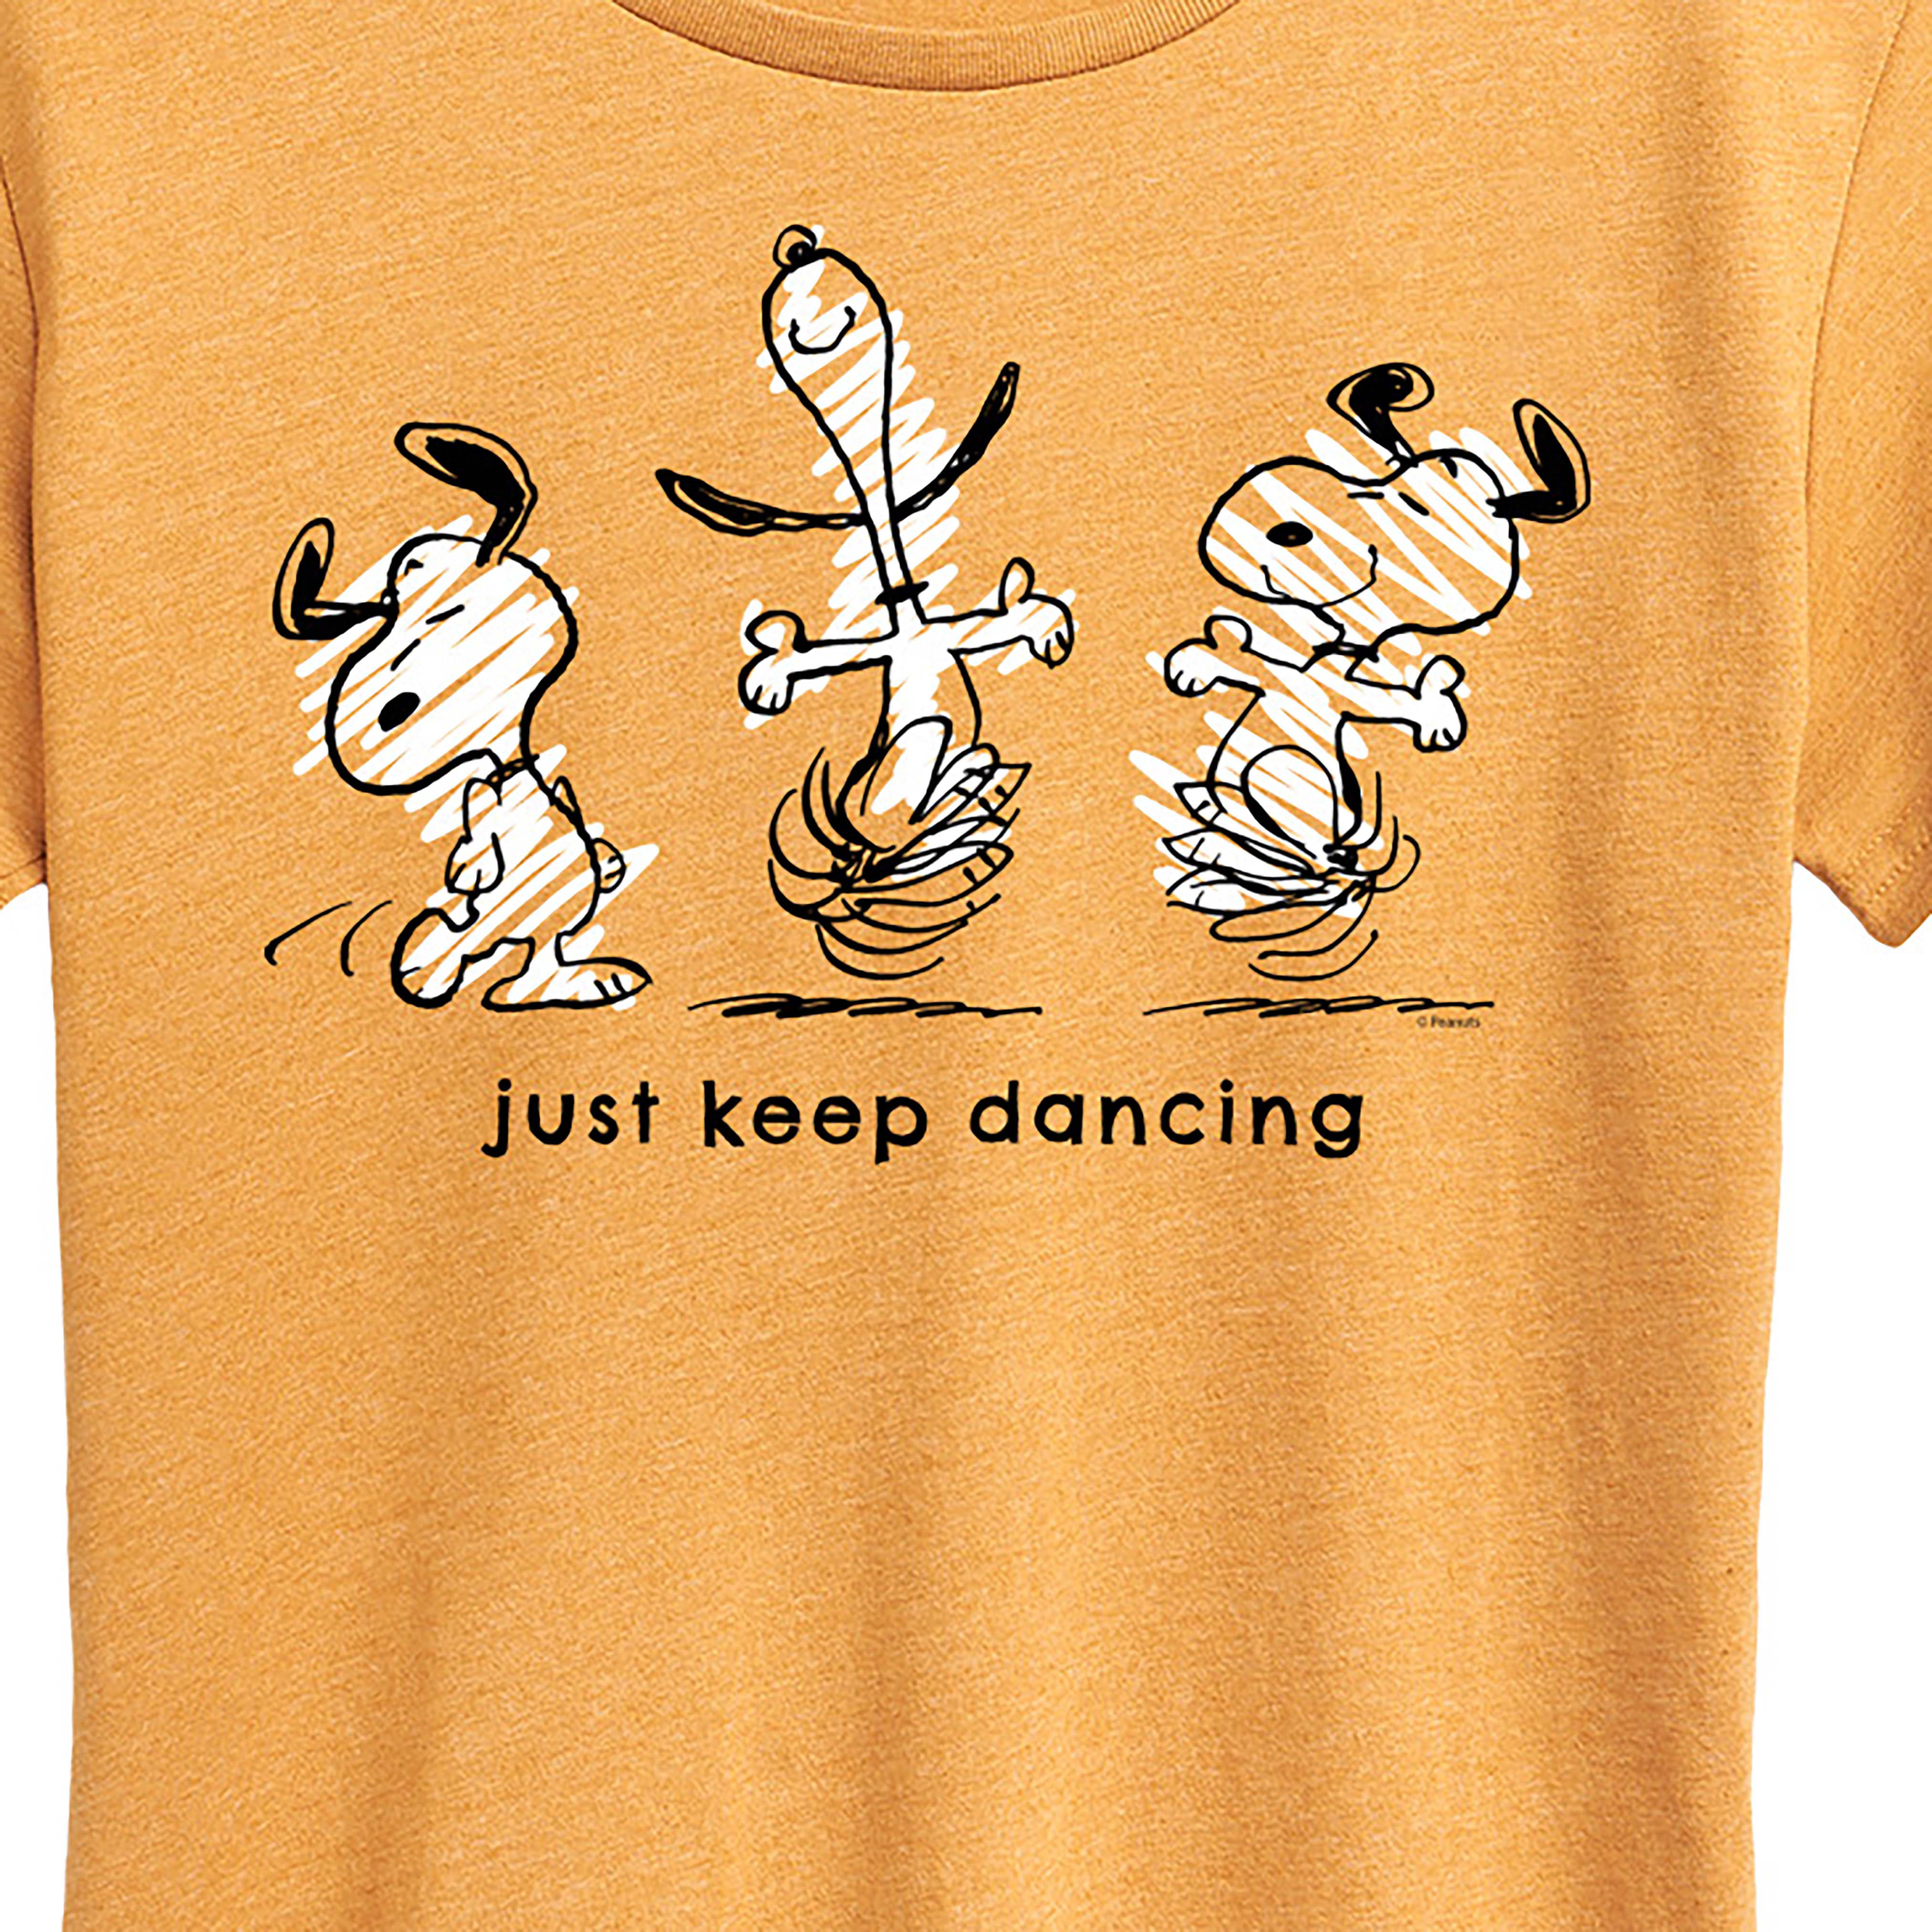 Peanuts - Snoopy Just Keep Dancing - Women's Short Sleeve Graphic T-Shirt